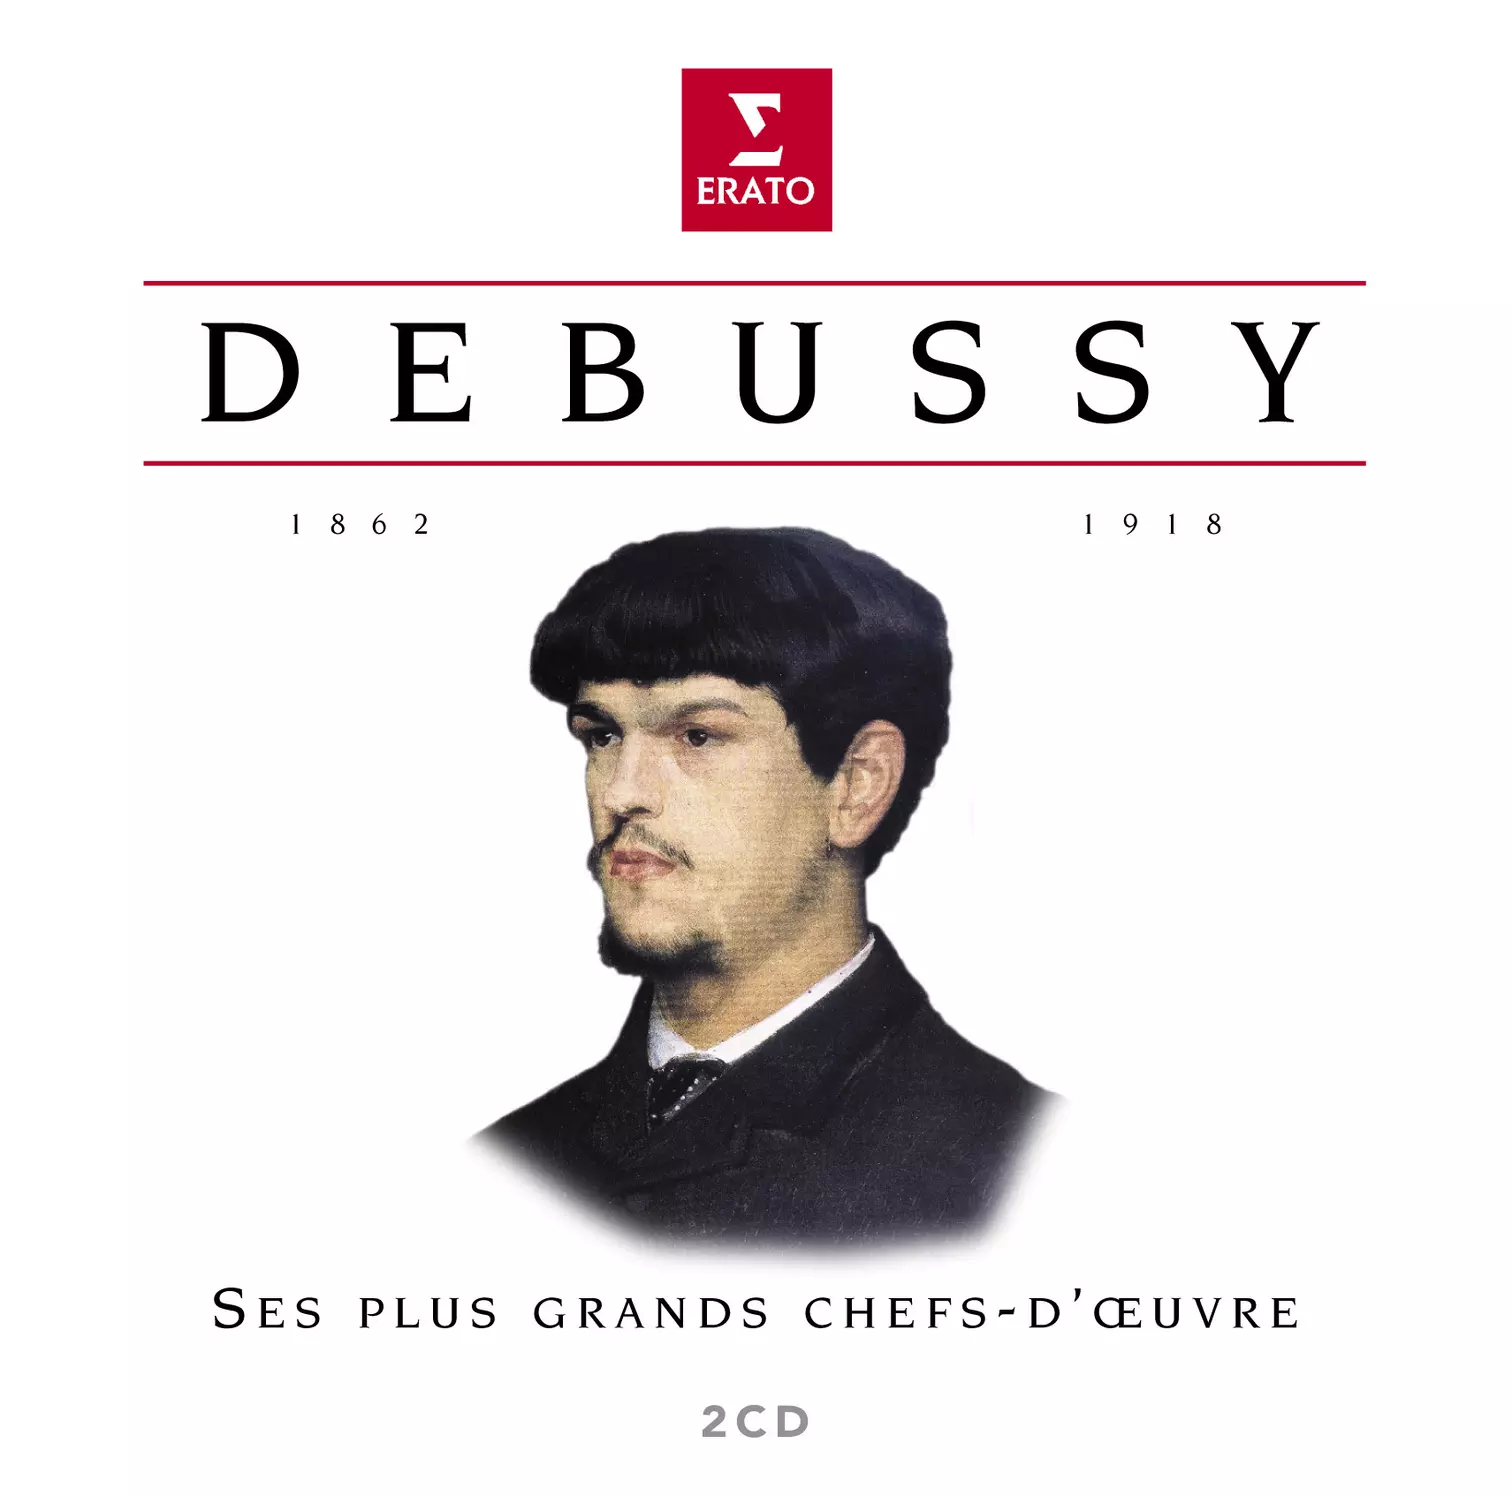 Debussy Ses plus grands chefs-d'oeuvre